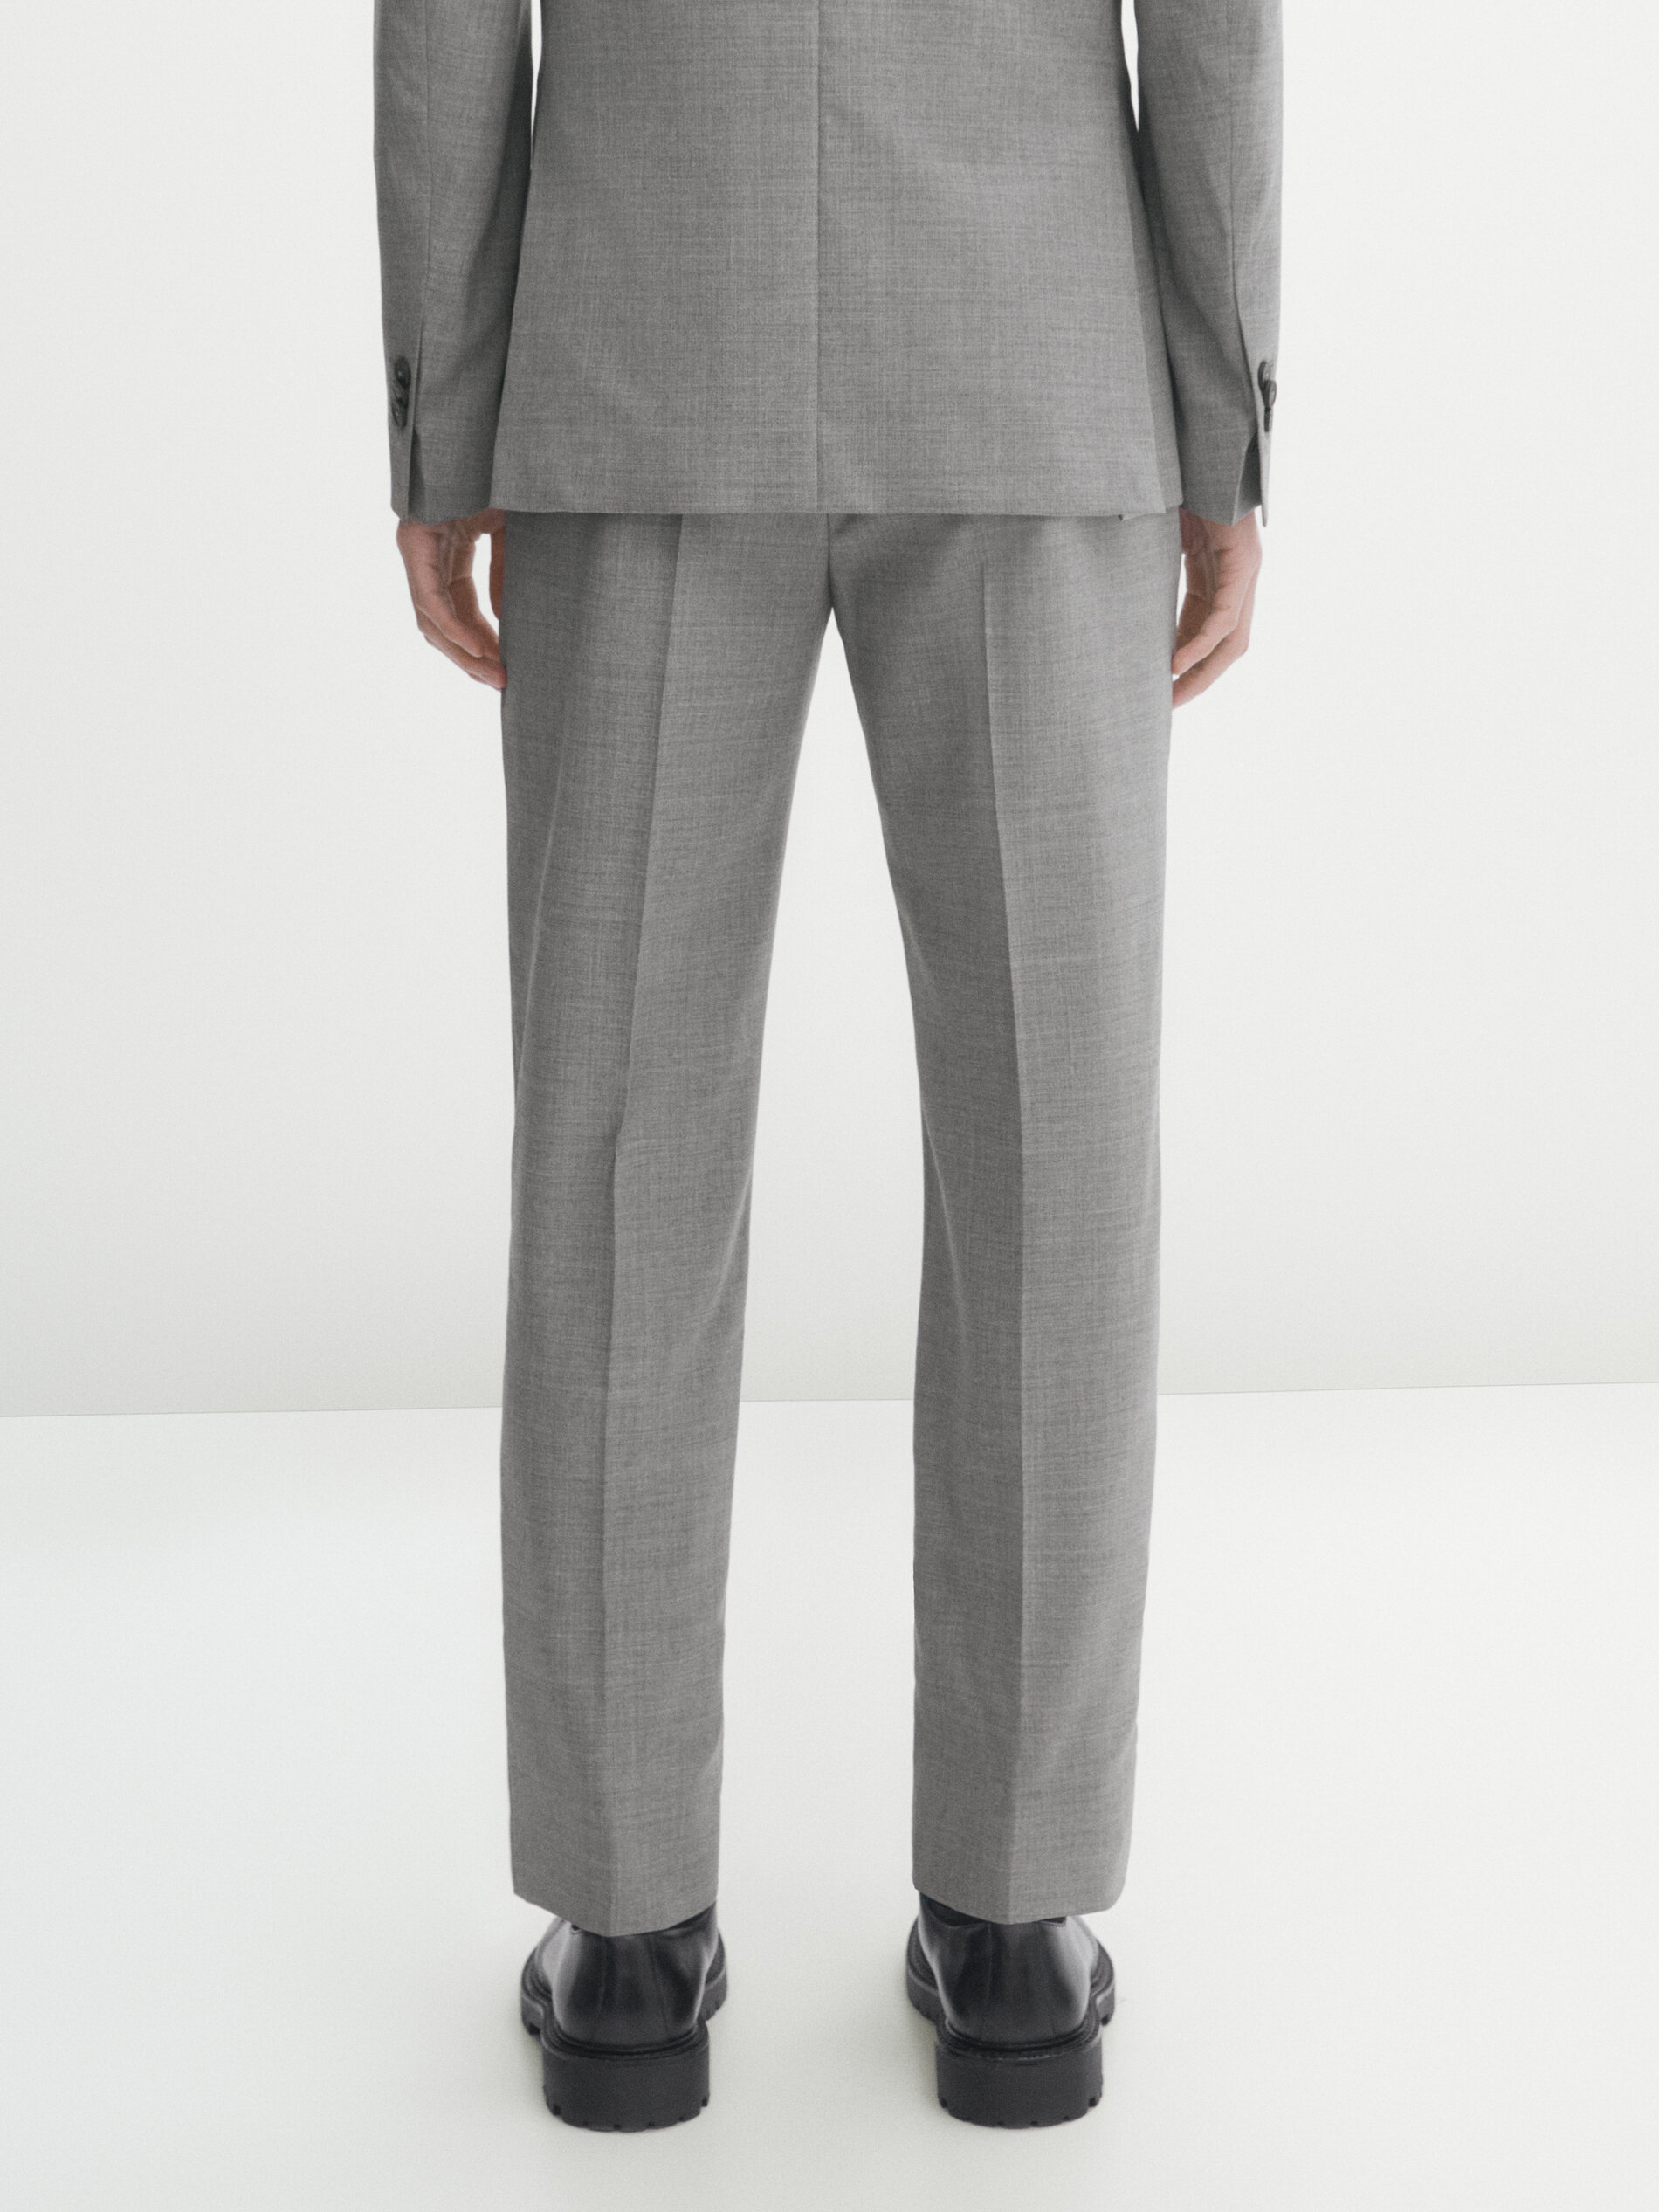 Taylor & Wright Hanks Grey Slim Fit Suit Trousers - Matalan